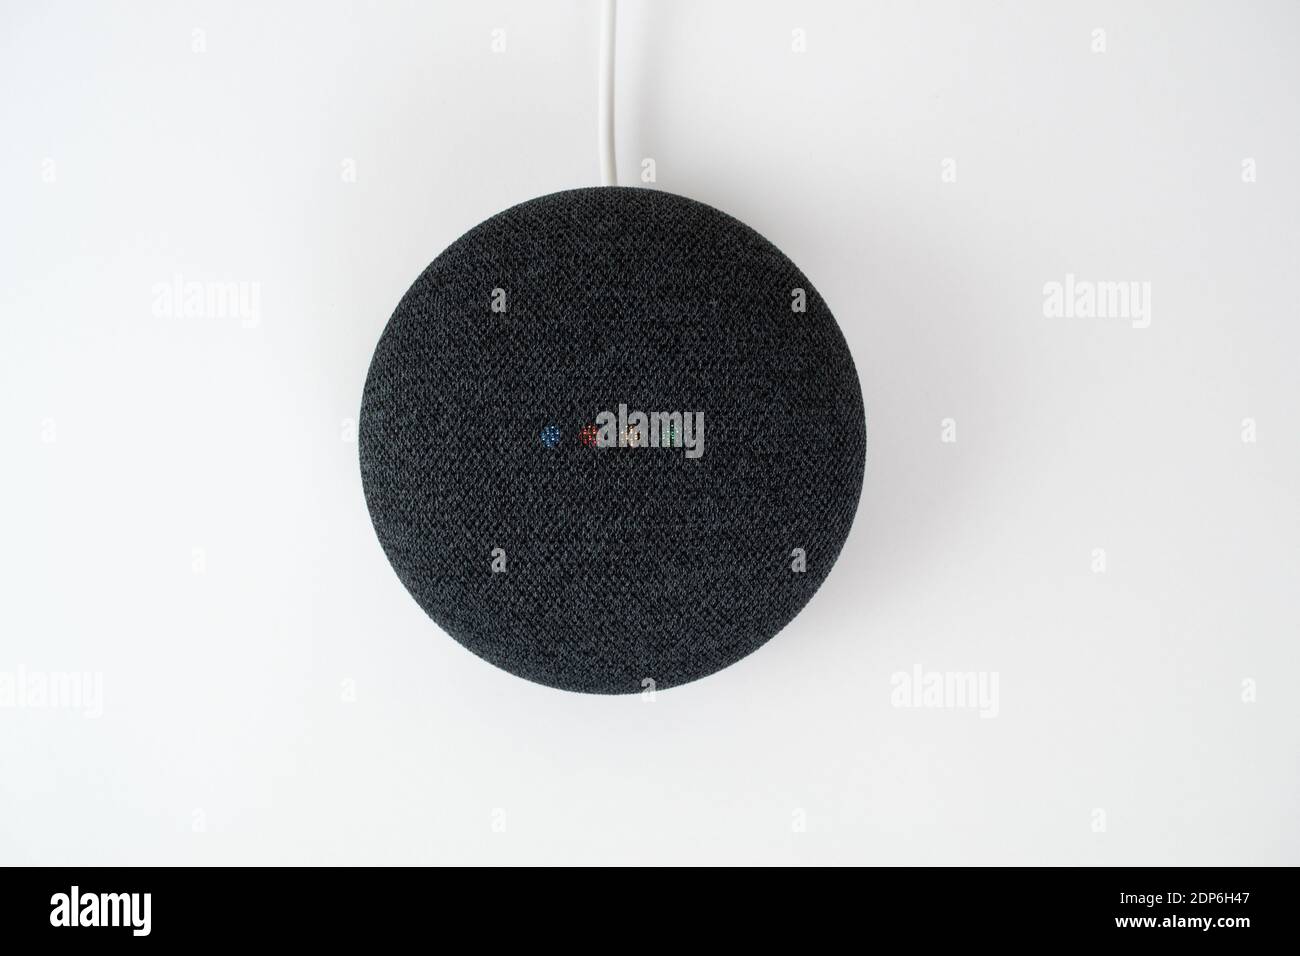 London, United Kingdom - 19 December 2020: Charcoal Google Nest Home Mini smart speaker with built in Google Assistant on a white background. Stock Photo